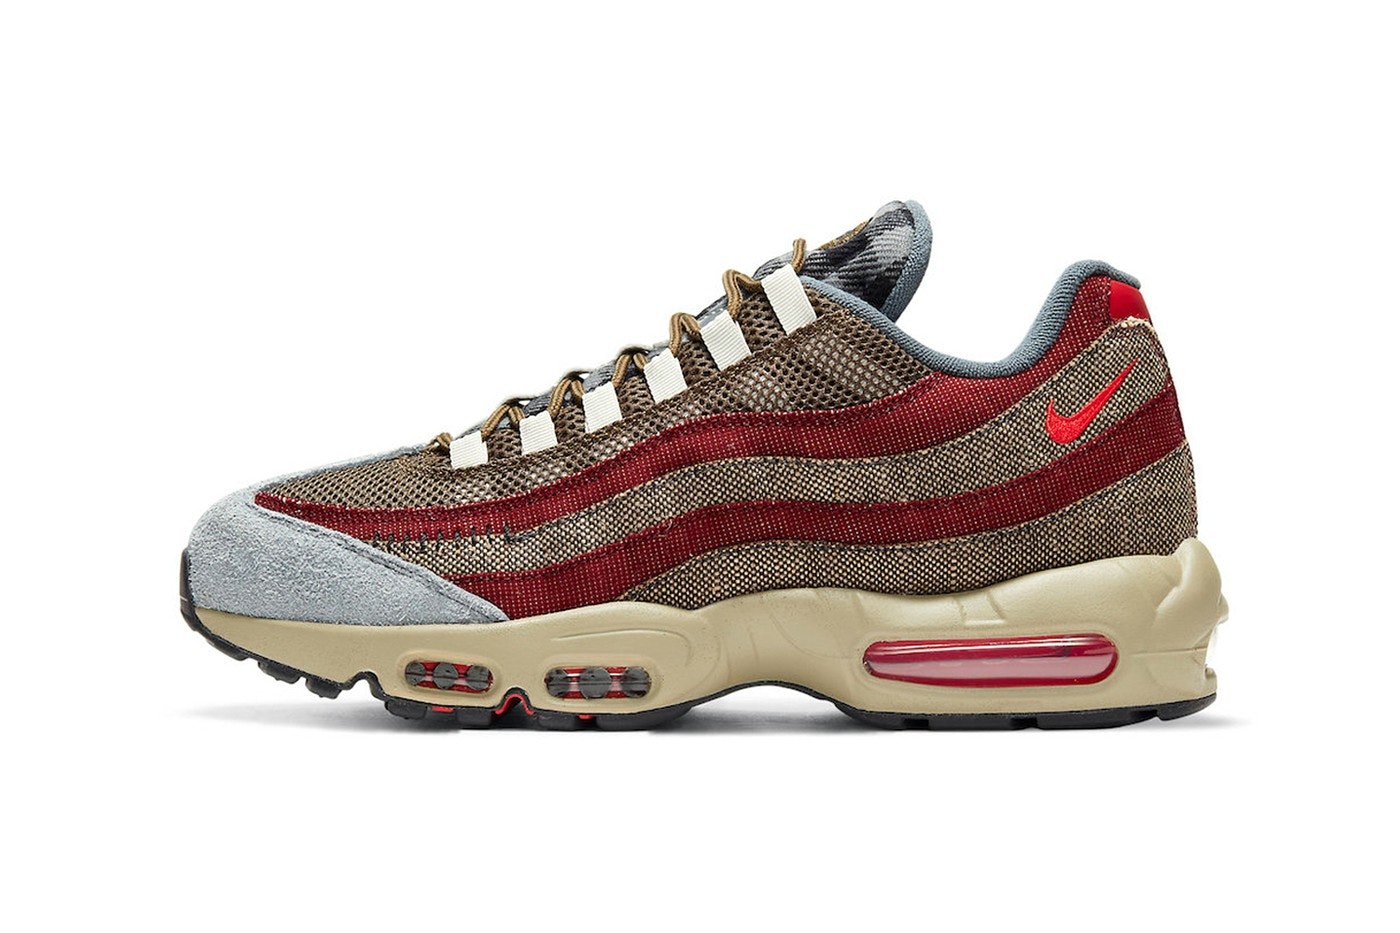 are nike air max 95 good for running